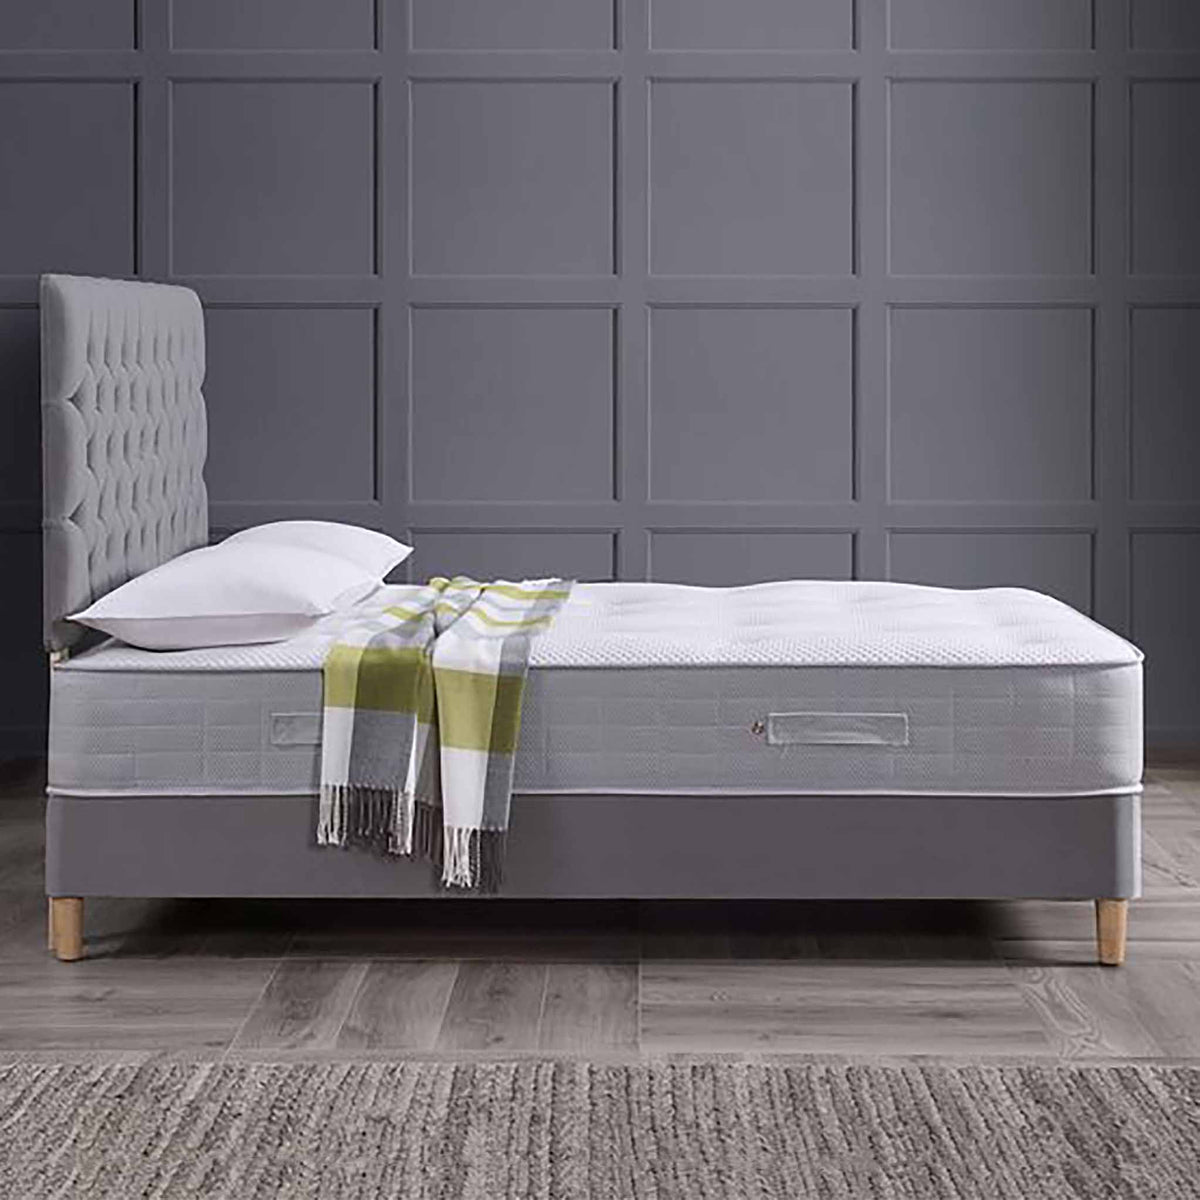 side lifestyle view of the Roseland Sleep Victoria Pocket Mattress